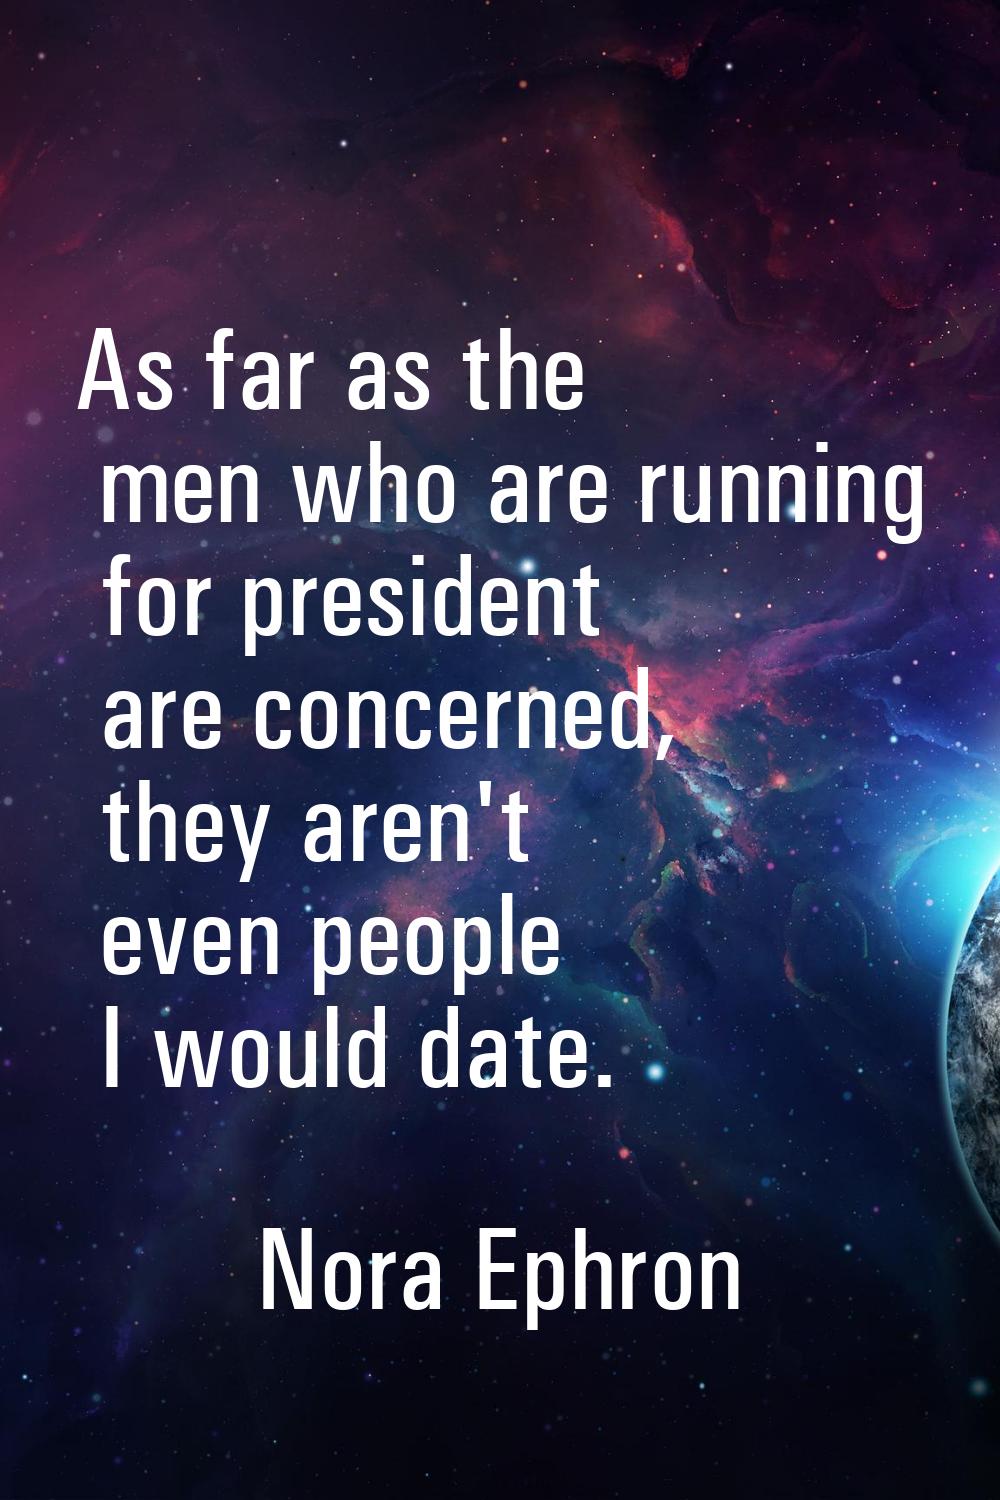 As far as the men who are running for president are concerned, they aren't even people I would date